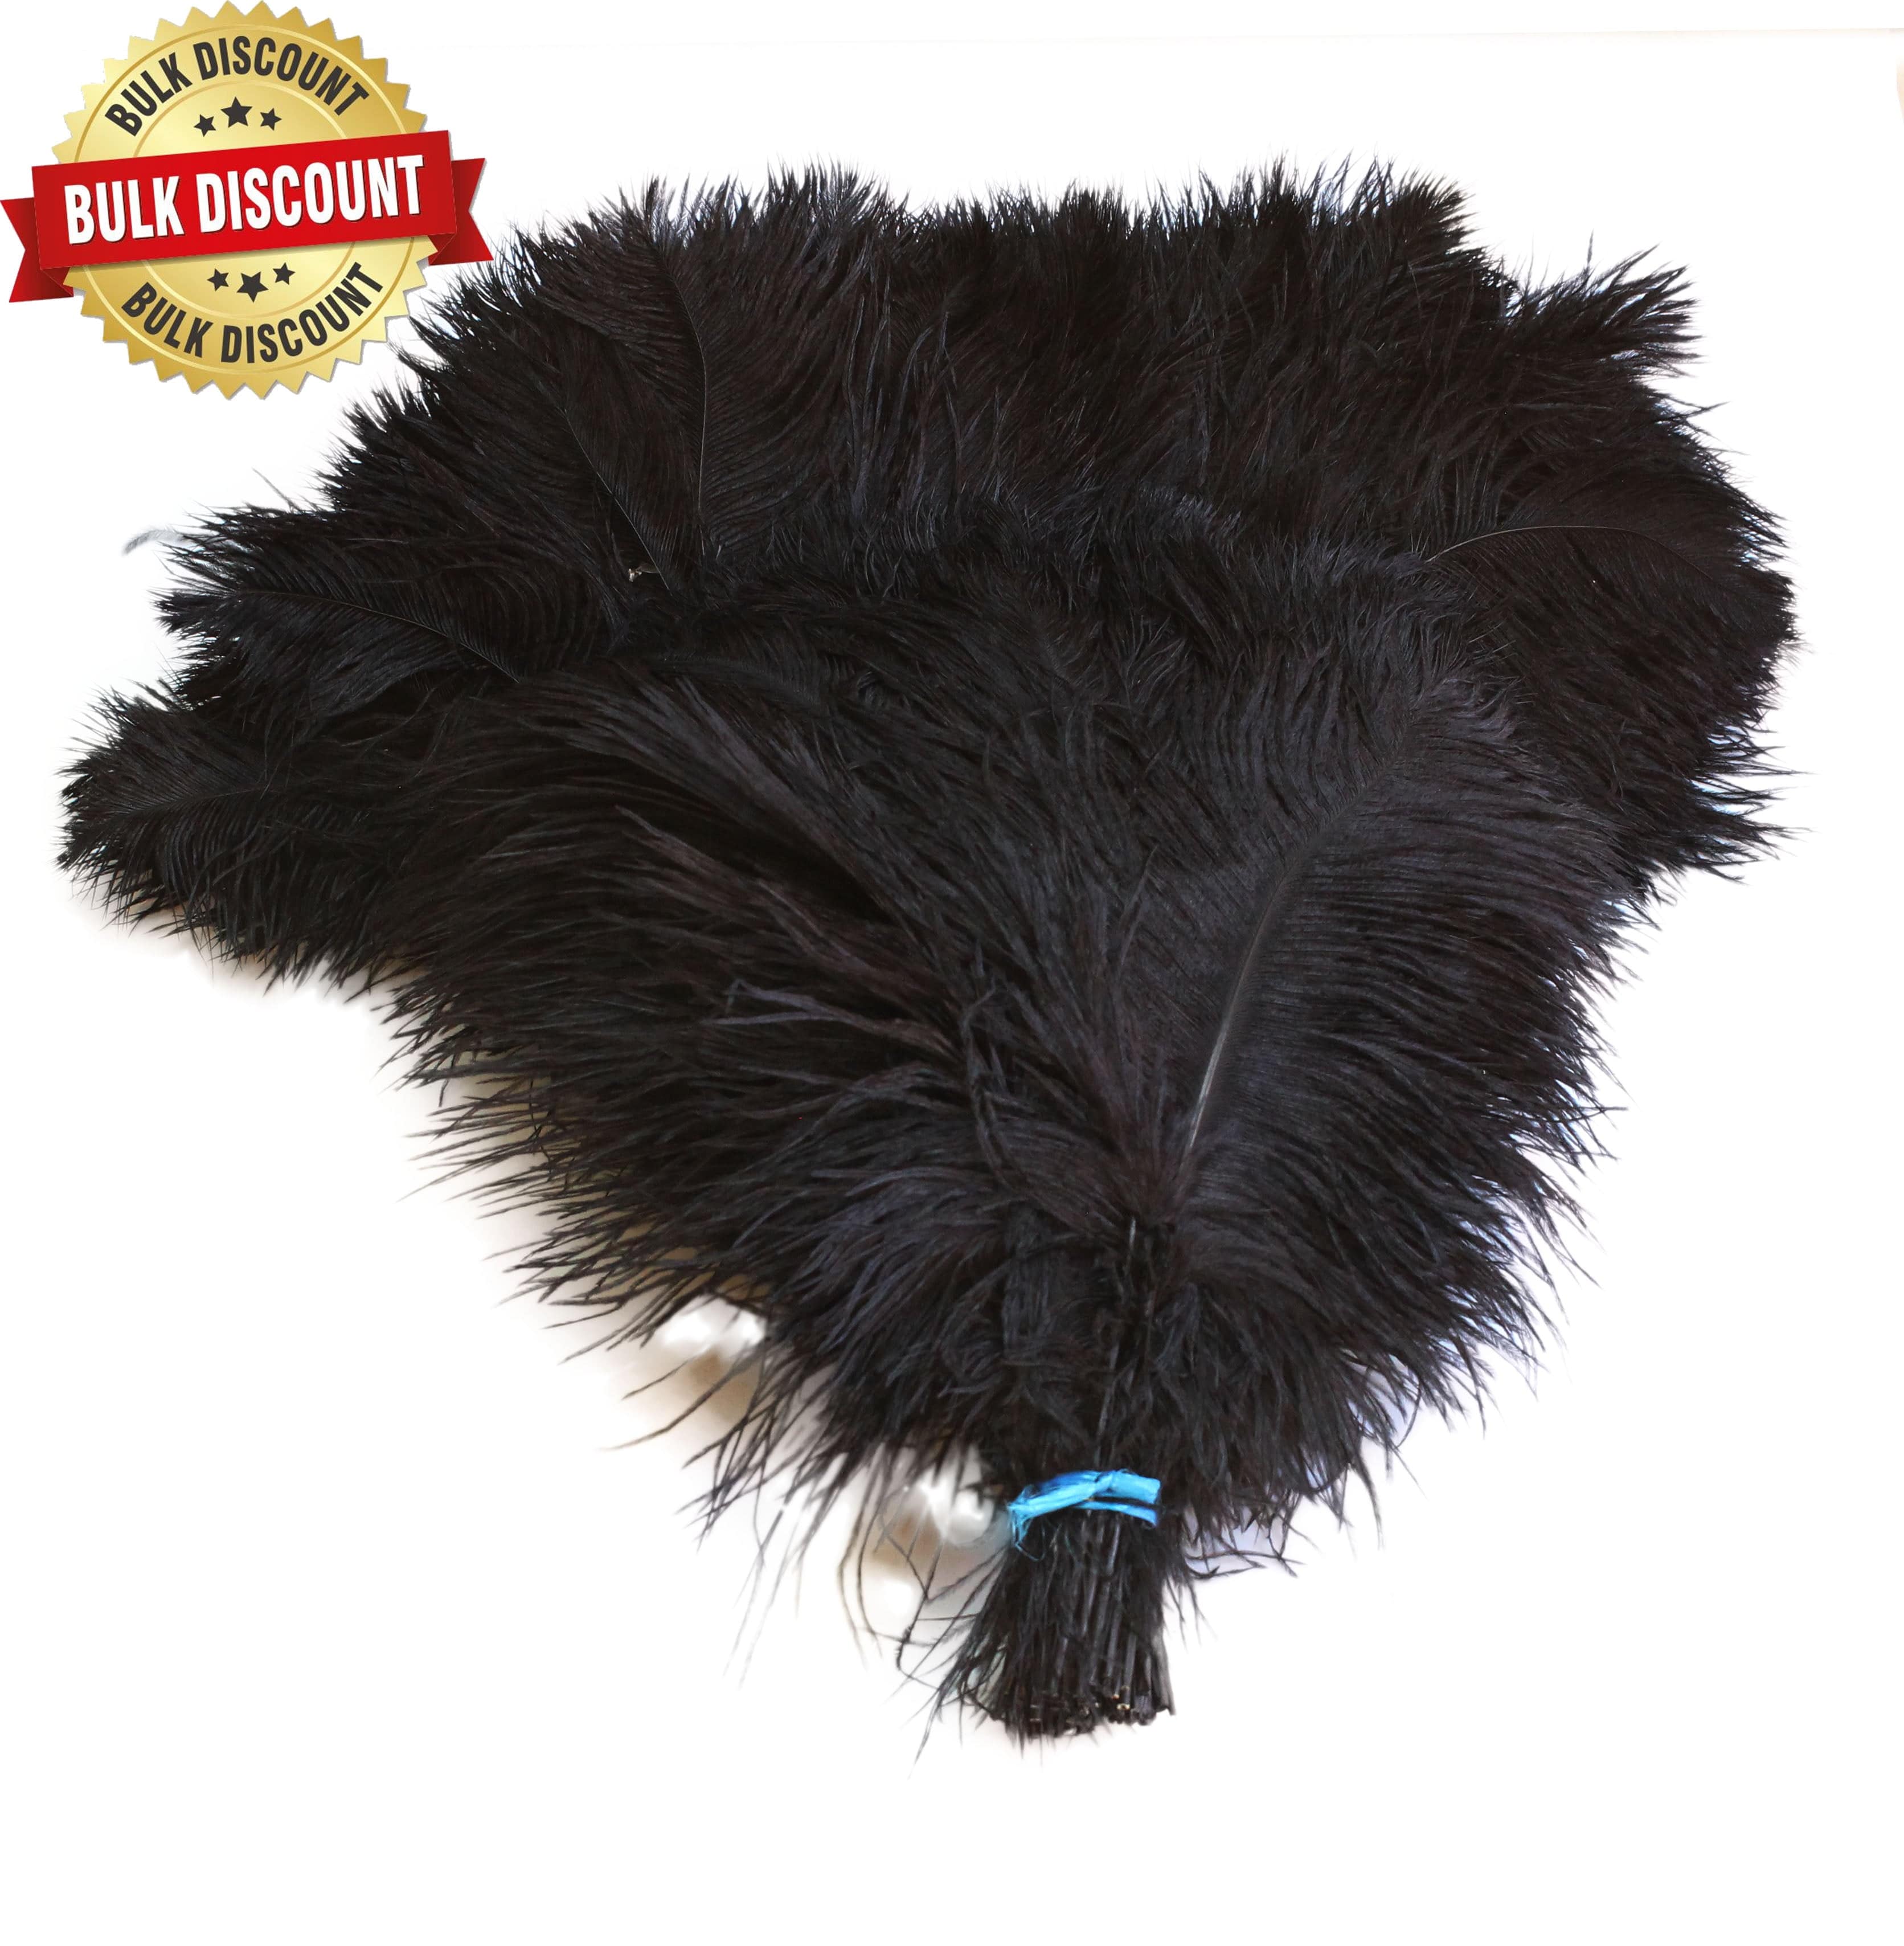 17-26in Black Ostrich Plumes/ Feathers